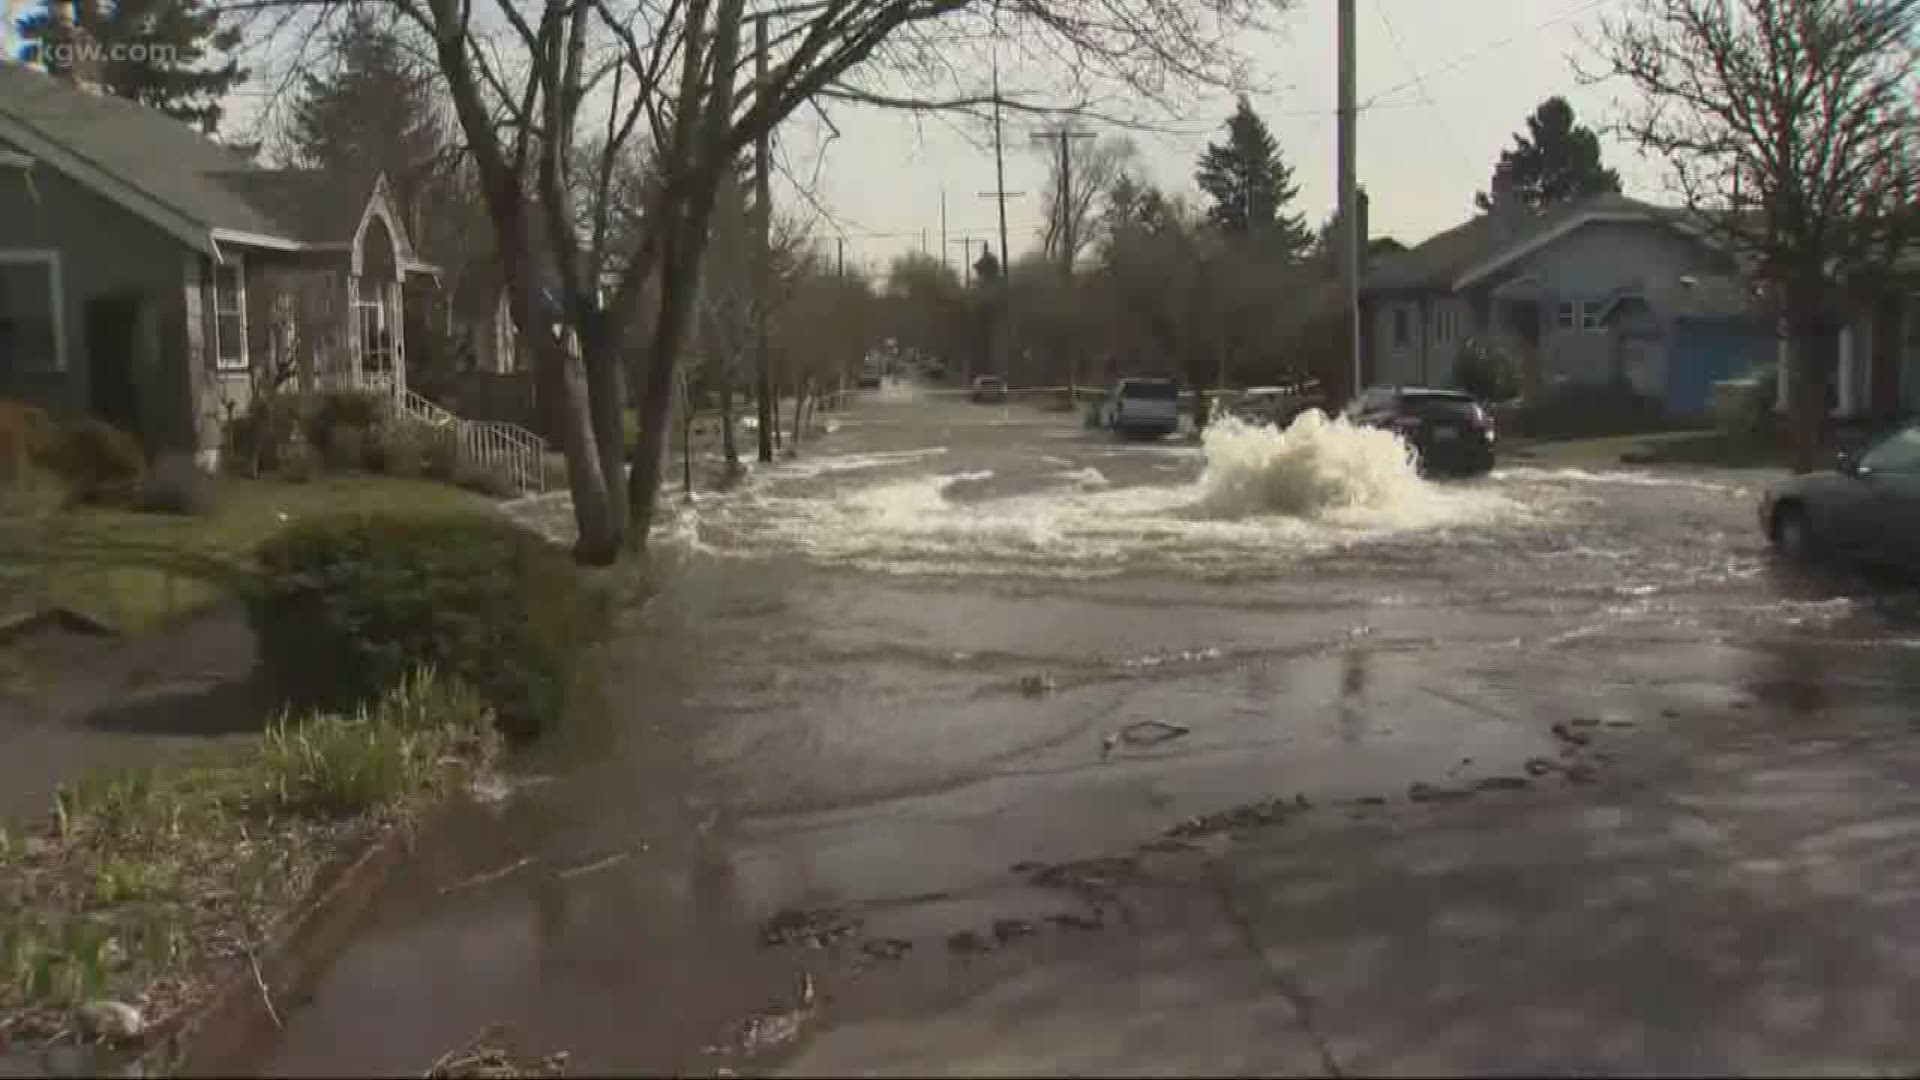 The city of Portland has denied 11 claims for damages to homes, cars and businesses after a massive water main break.